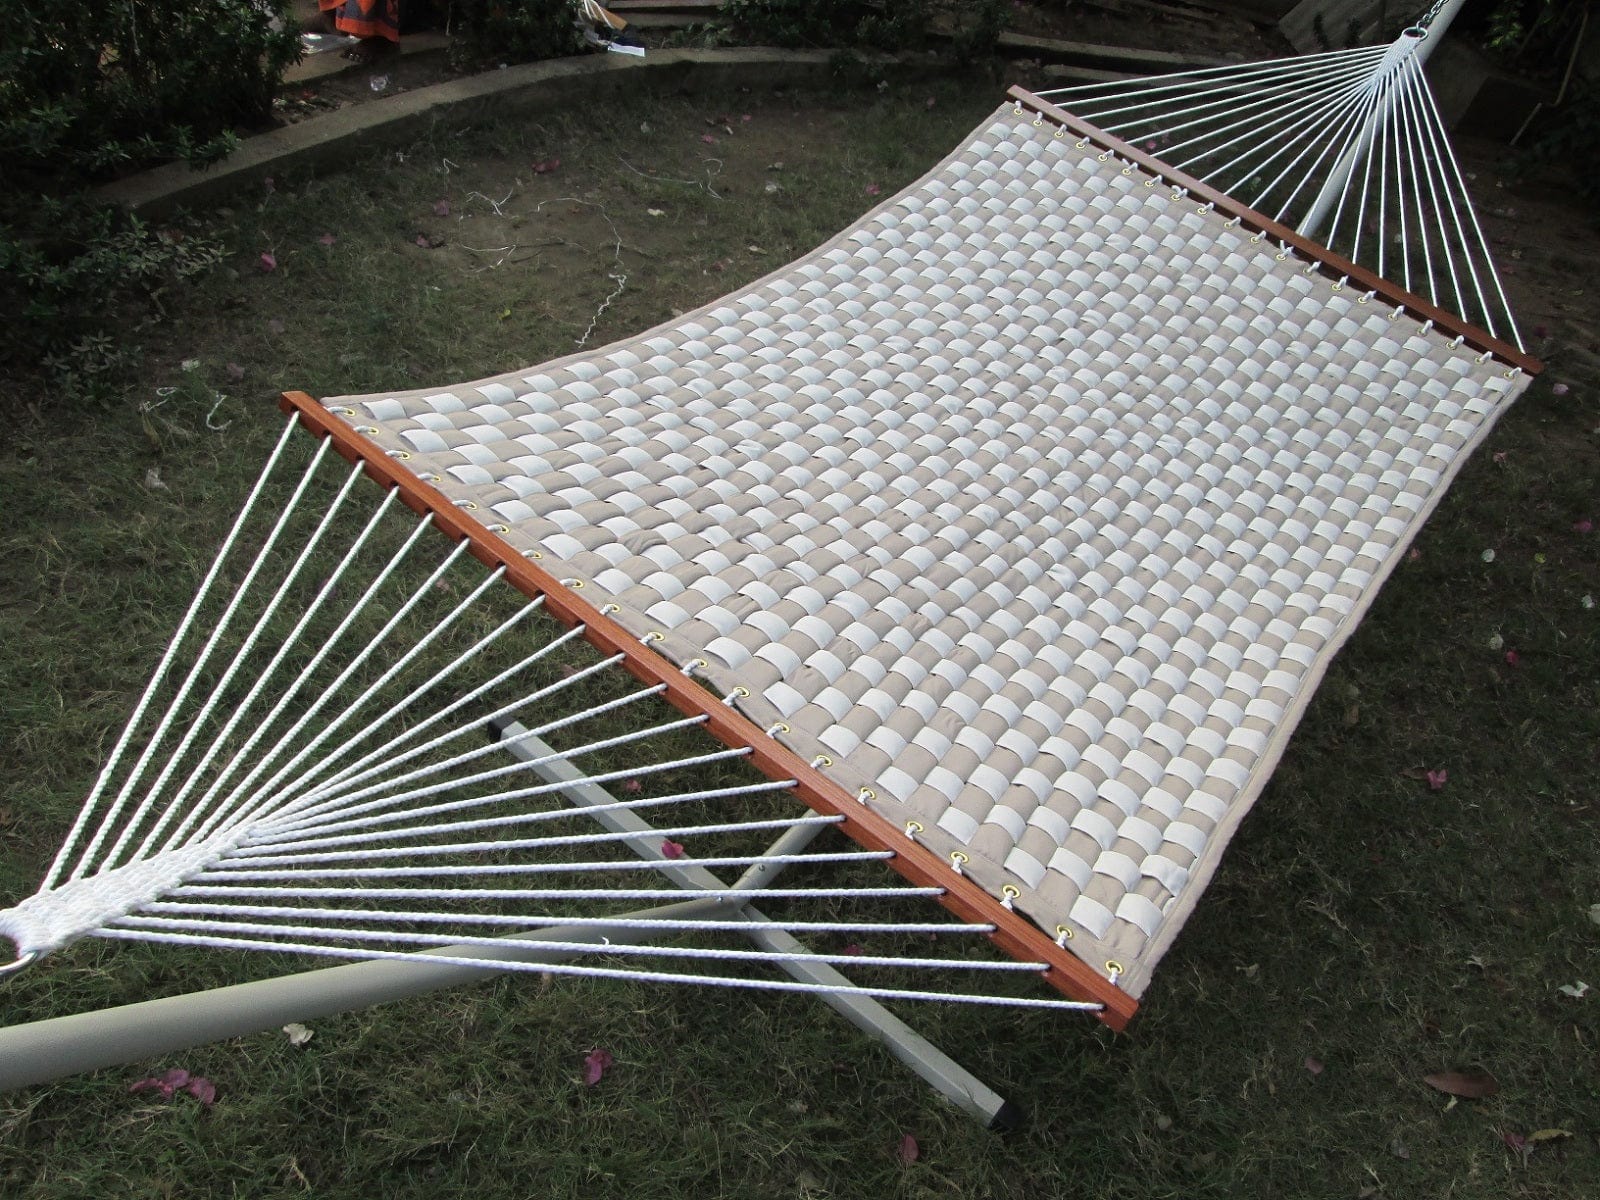 Double Checkered Soft Comb Quilted Hammock, 200kg Weight Capacity- 140W X 396L cm